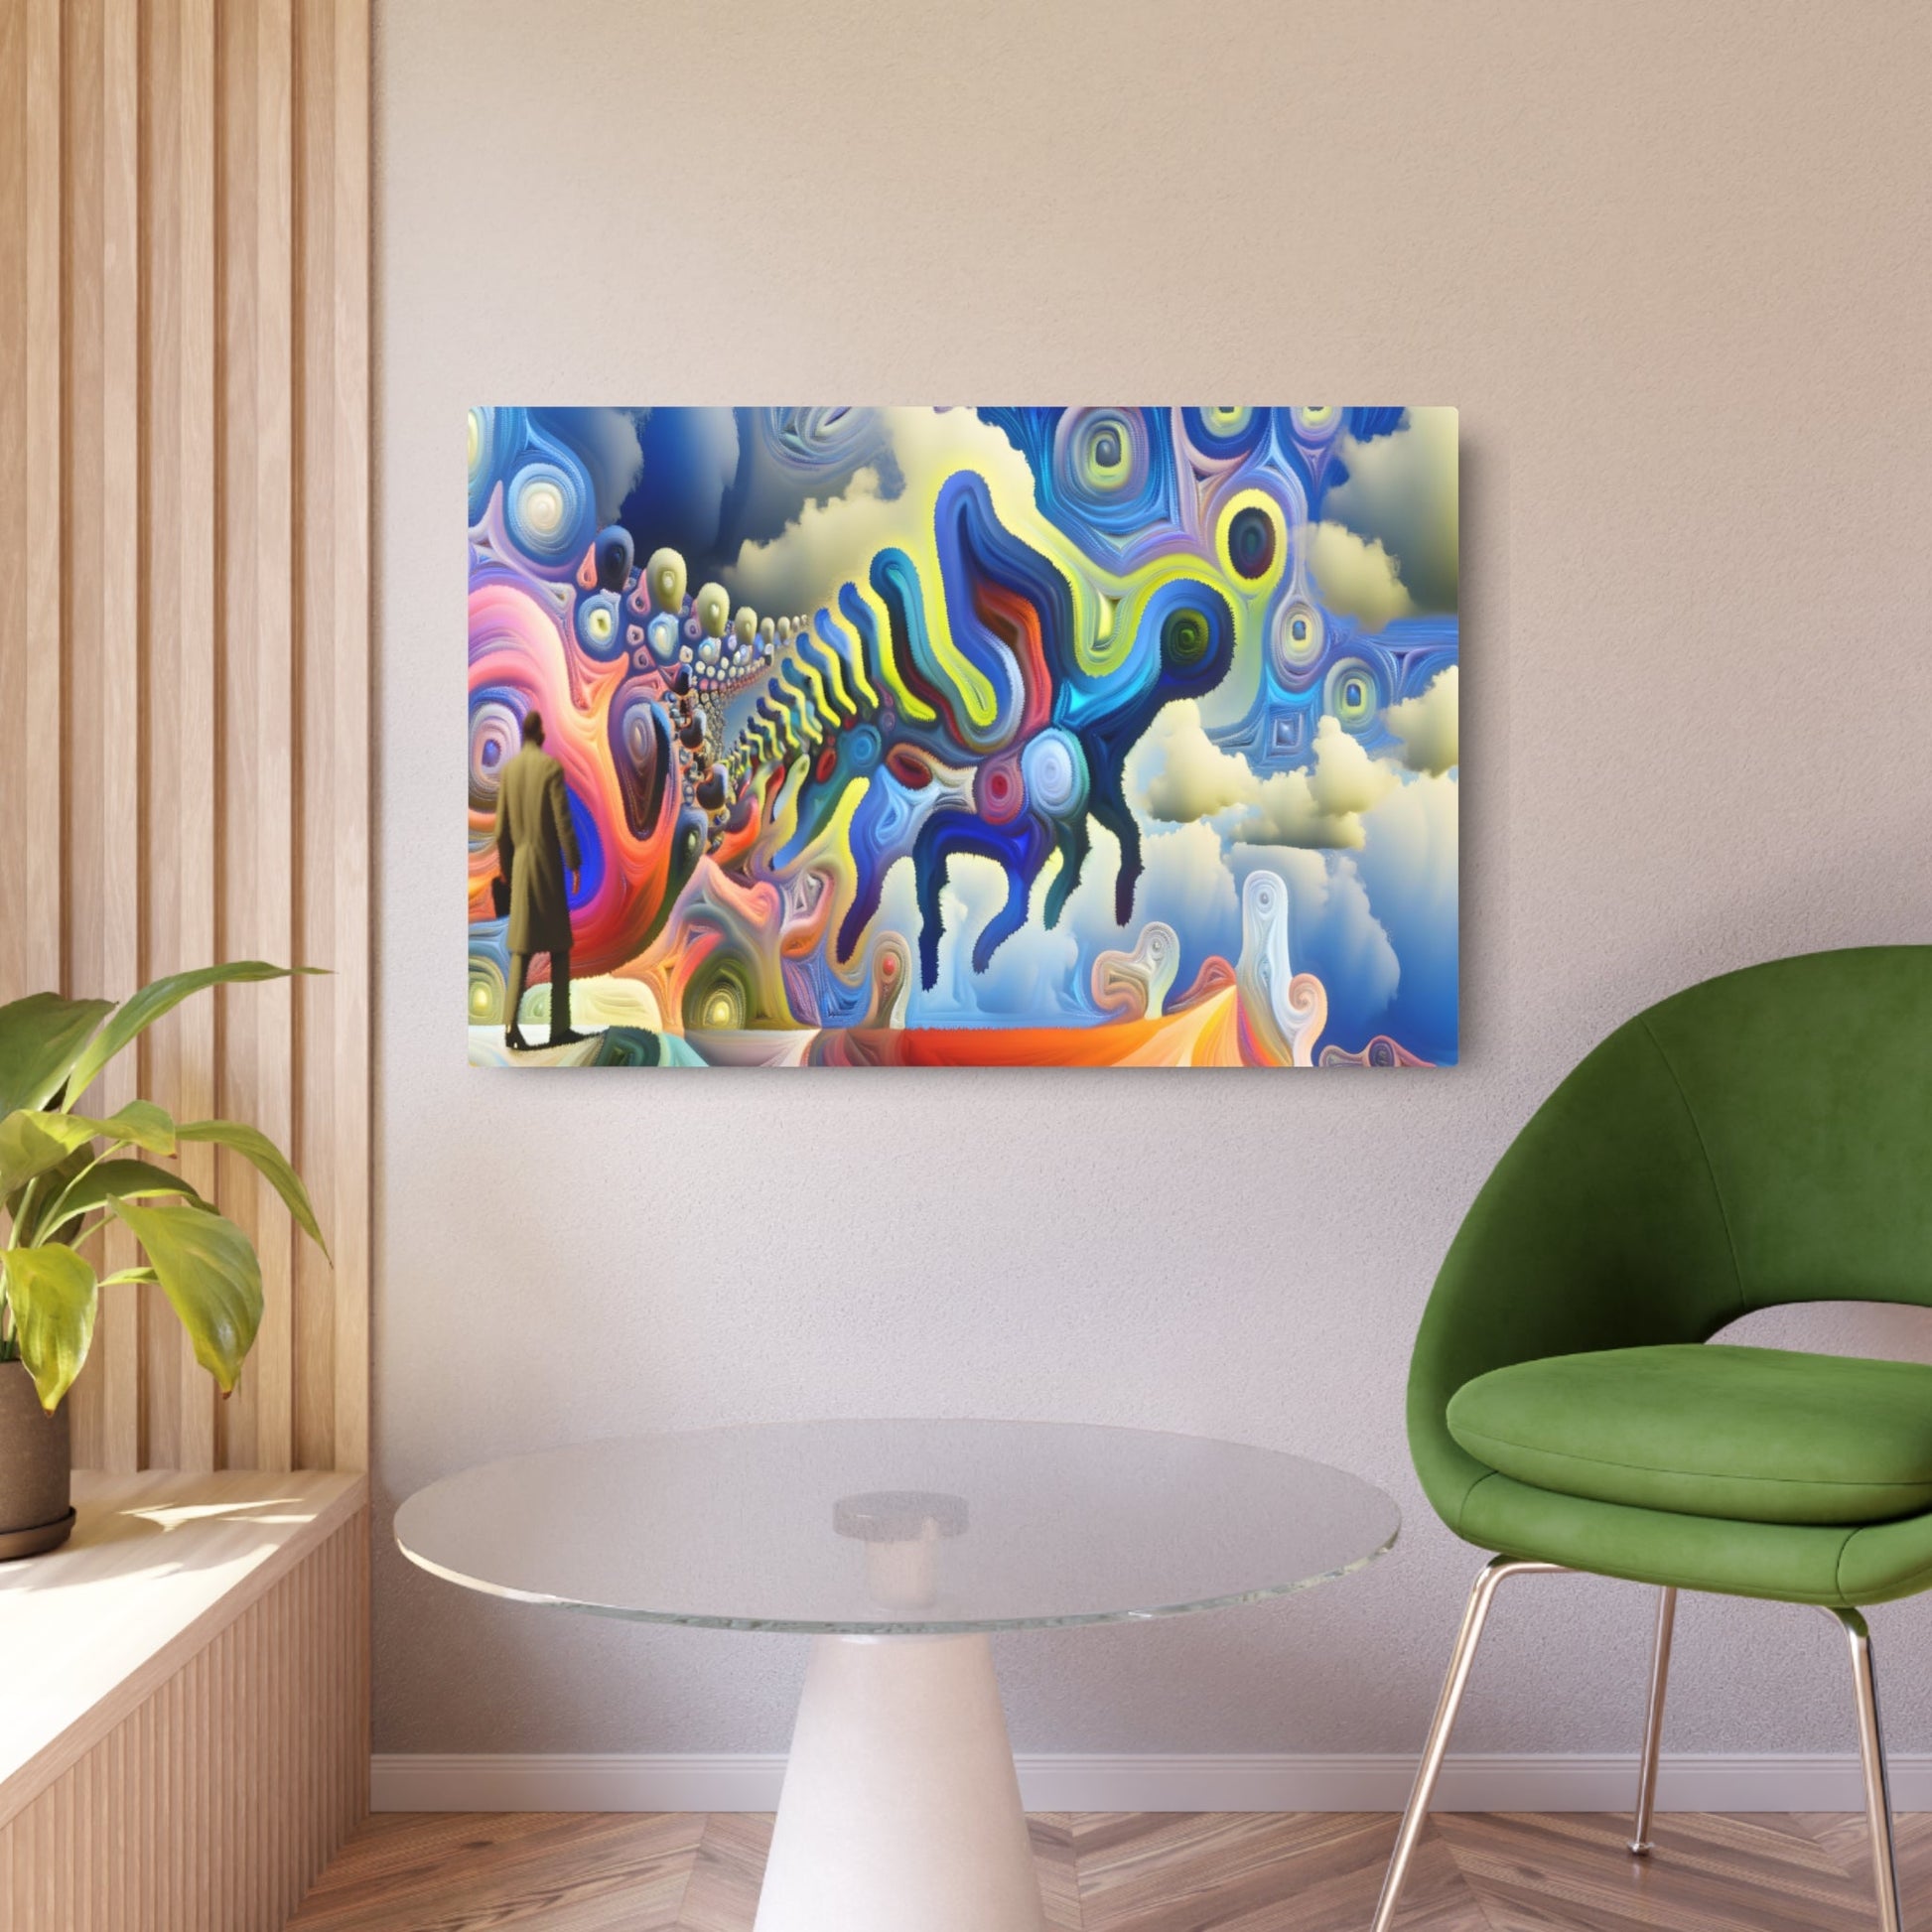 Metal Poster Art | "Surrealism Artwork - Modern Contemporary Style Dream-like Landscapes with Strange Creatures in Vivid Colors and Exaggerated Elements" - Metal Poster Art 36″ x 24″ (Horizontal) 0.12''